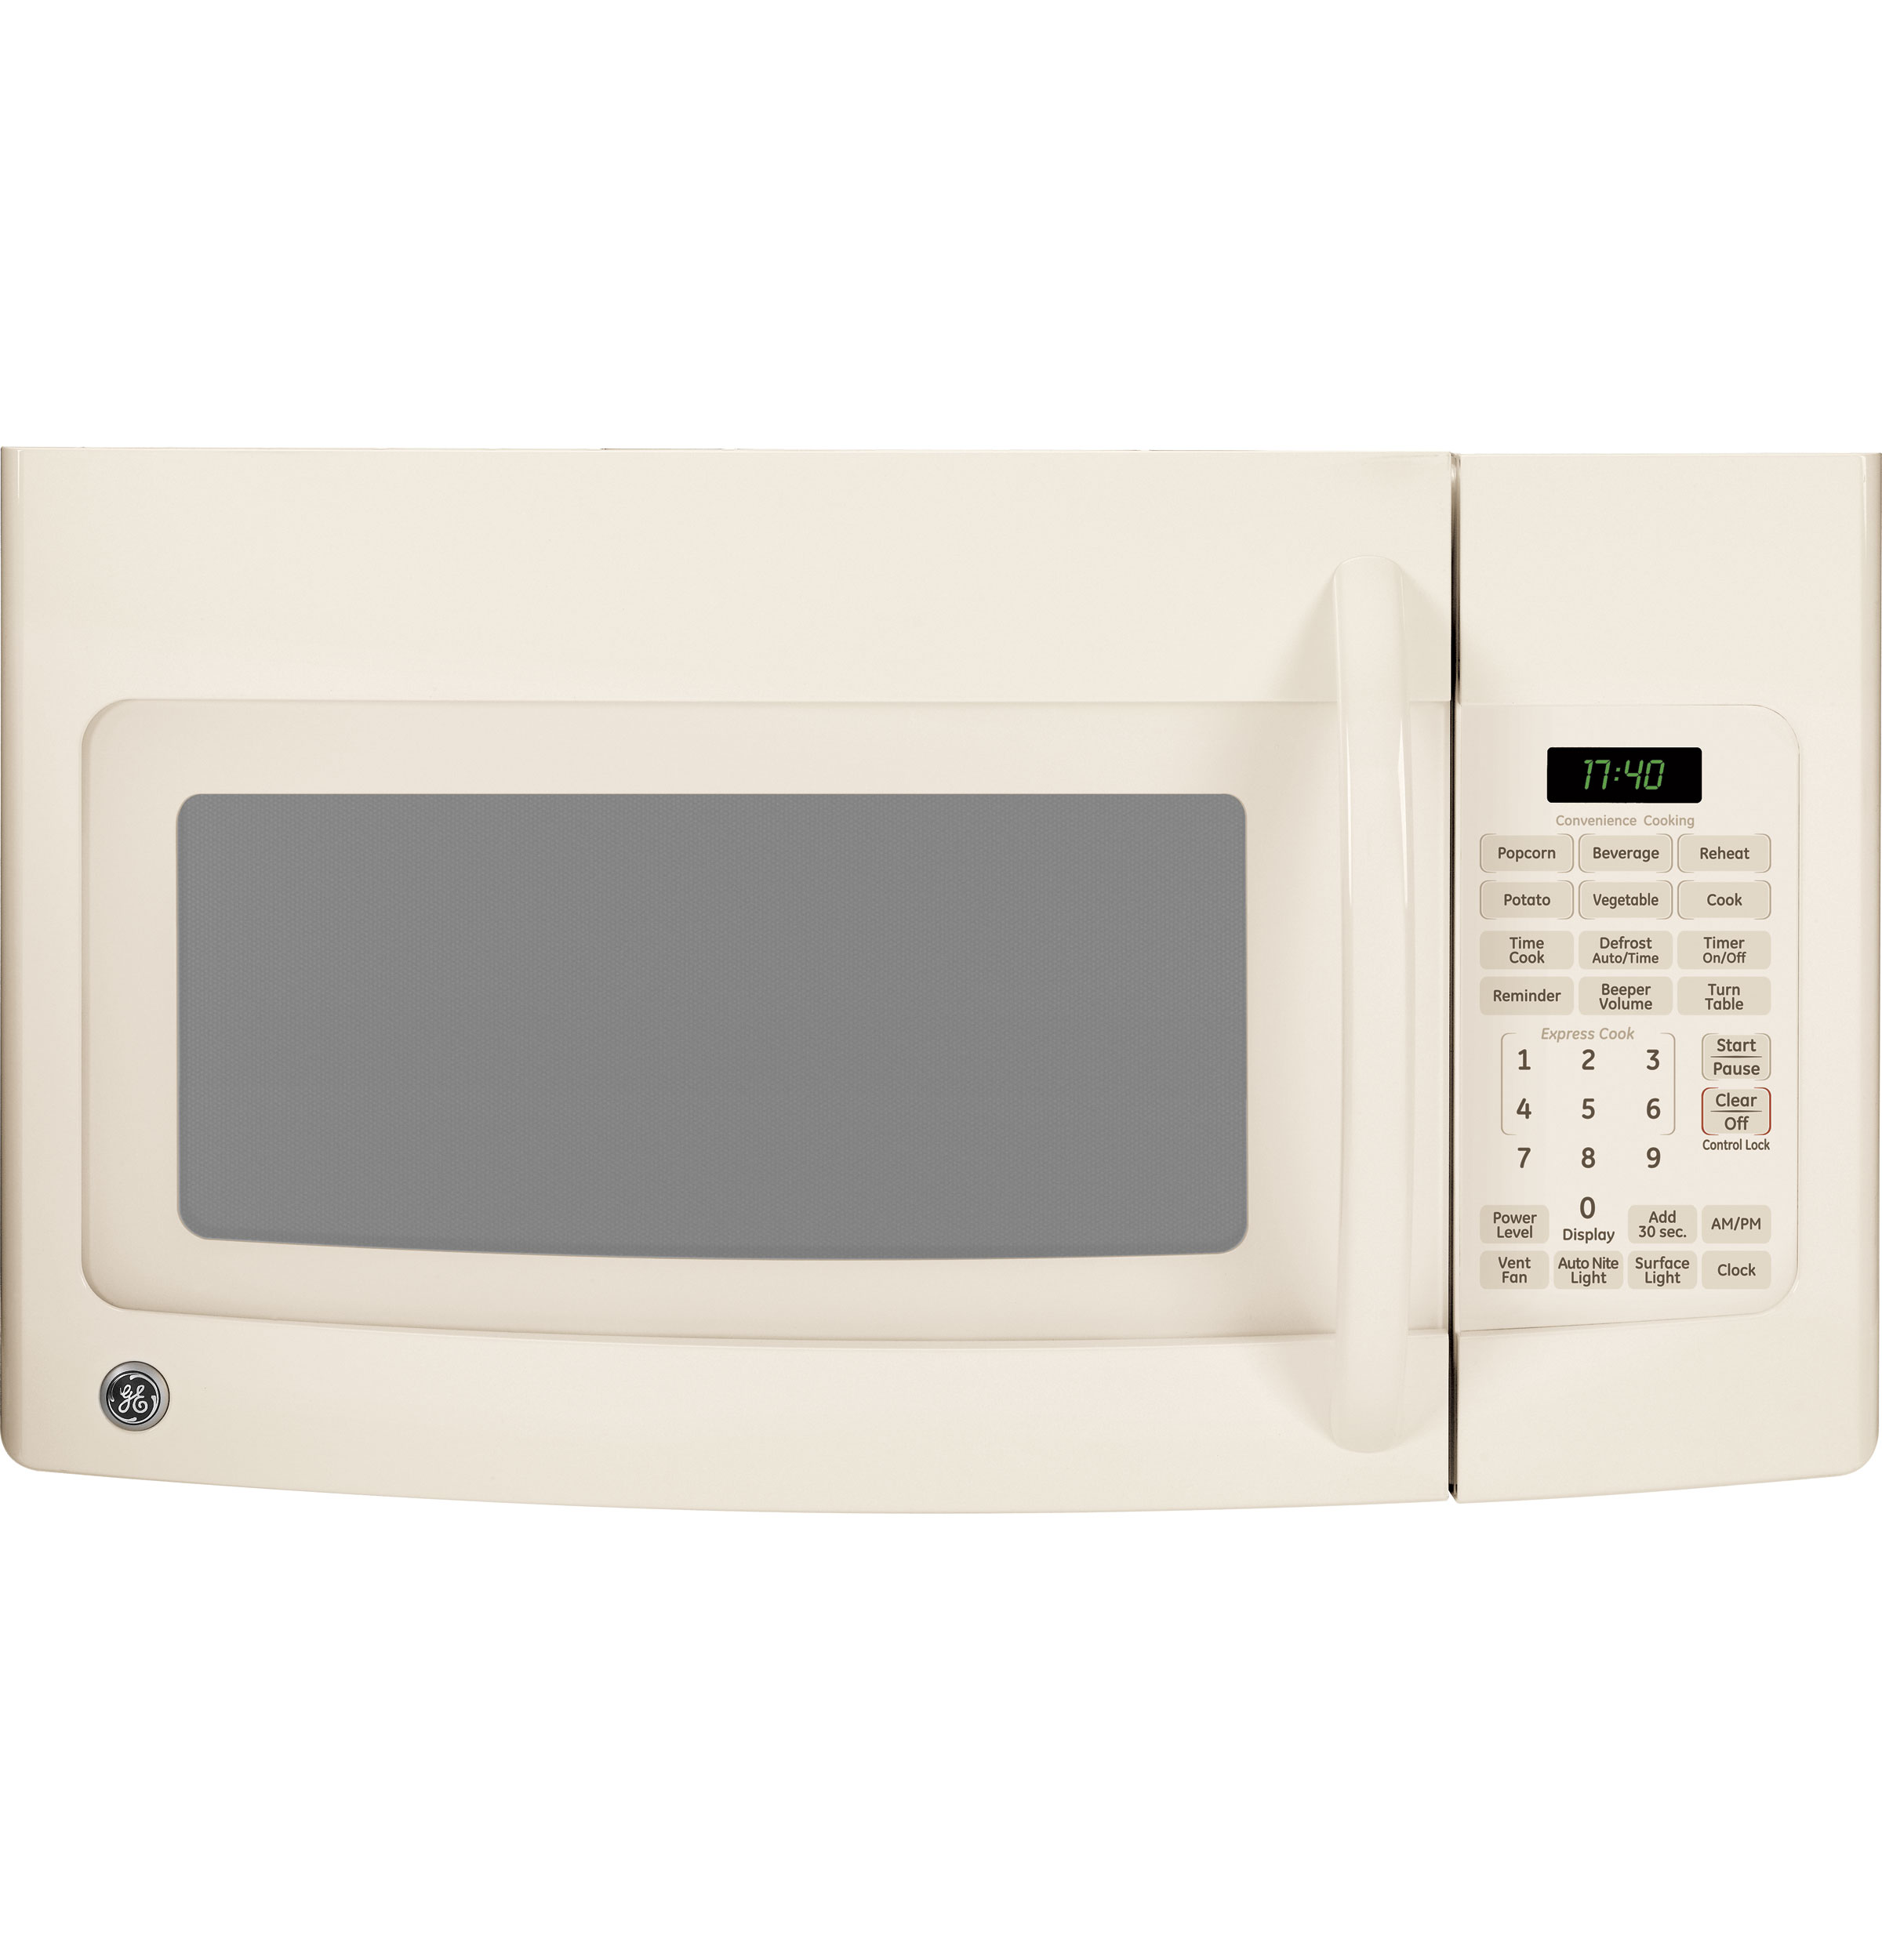 GE Spacemaker® 1.7 Cu. Ft. Over-the-Range Microwave Oven